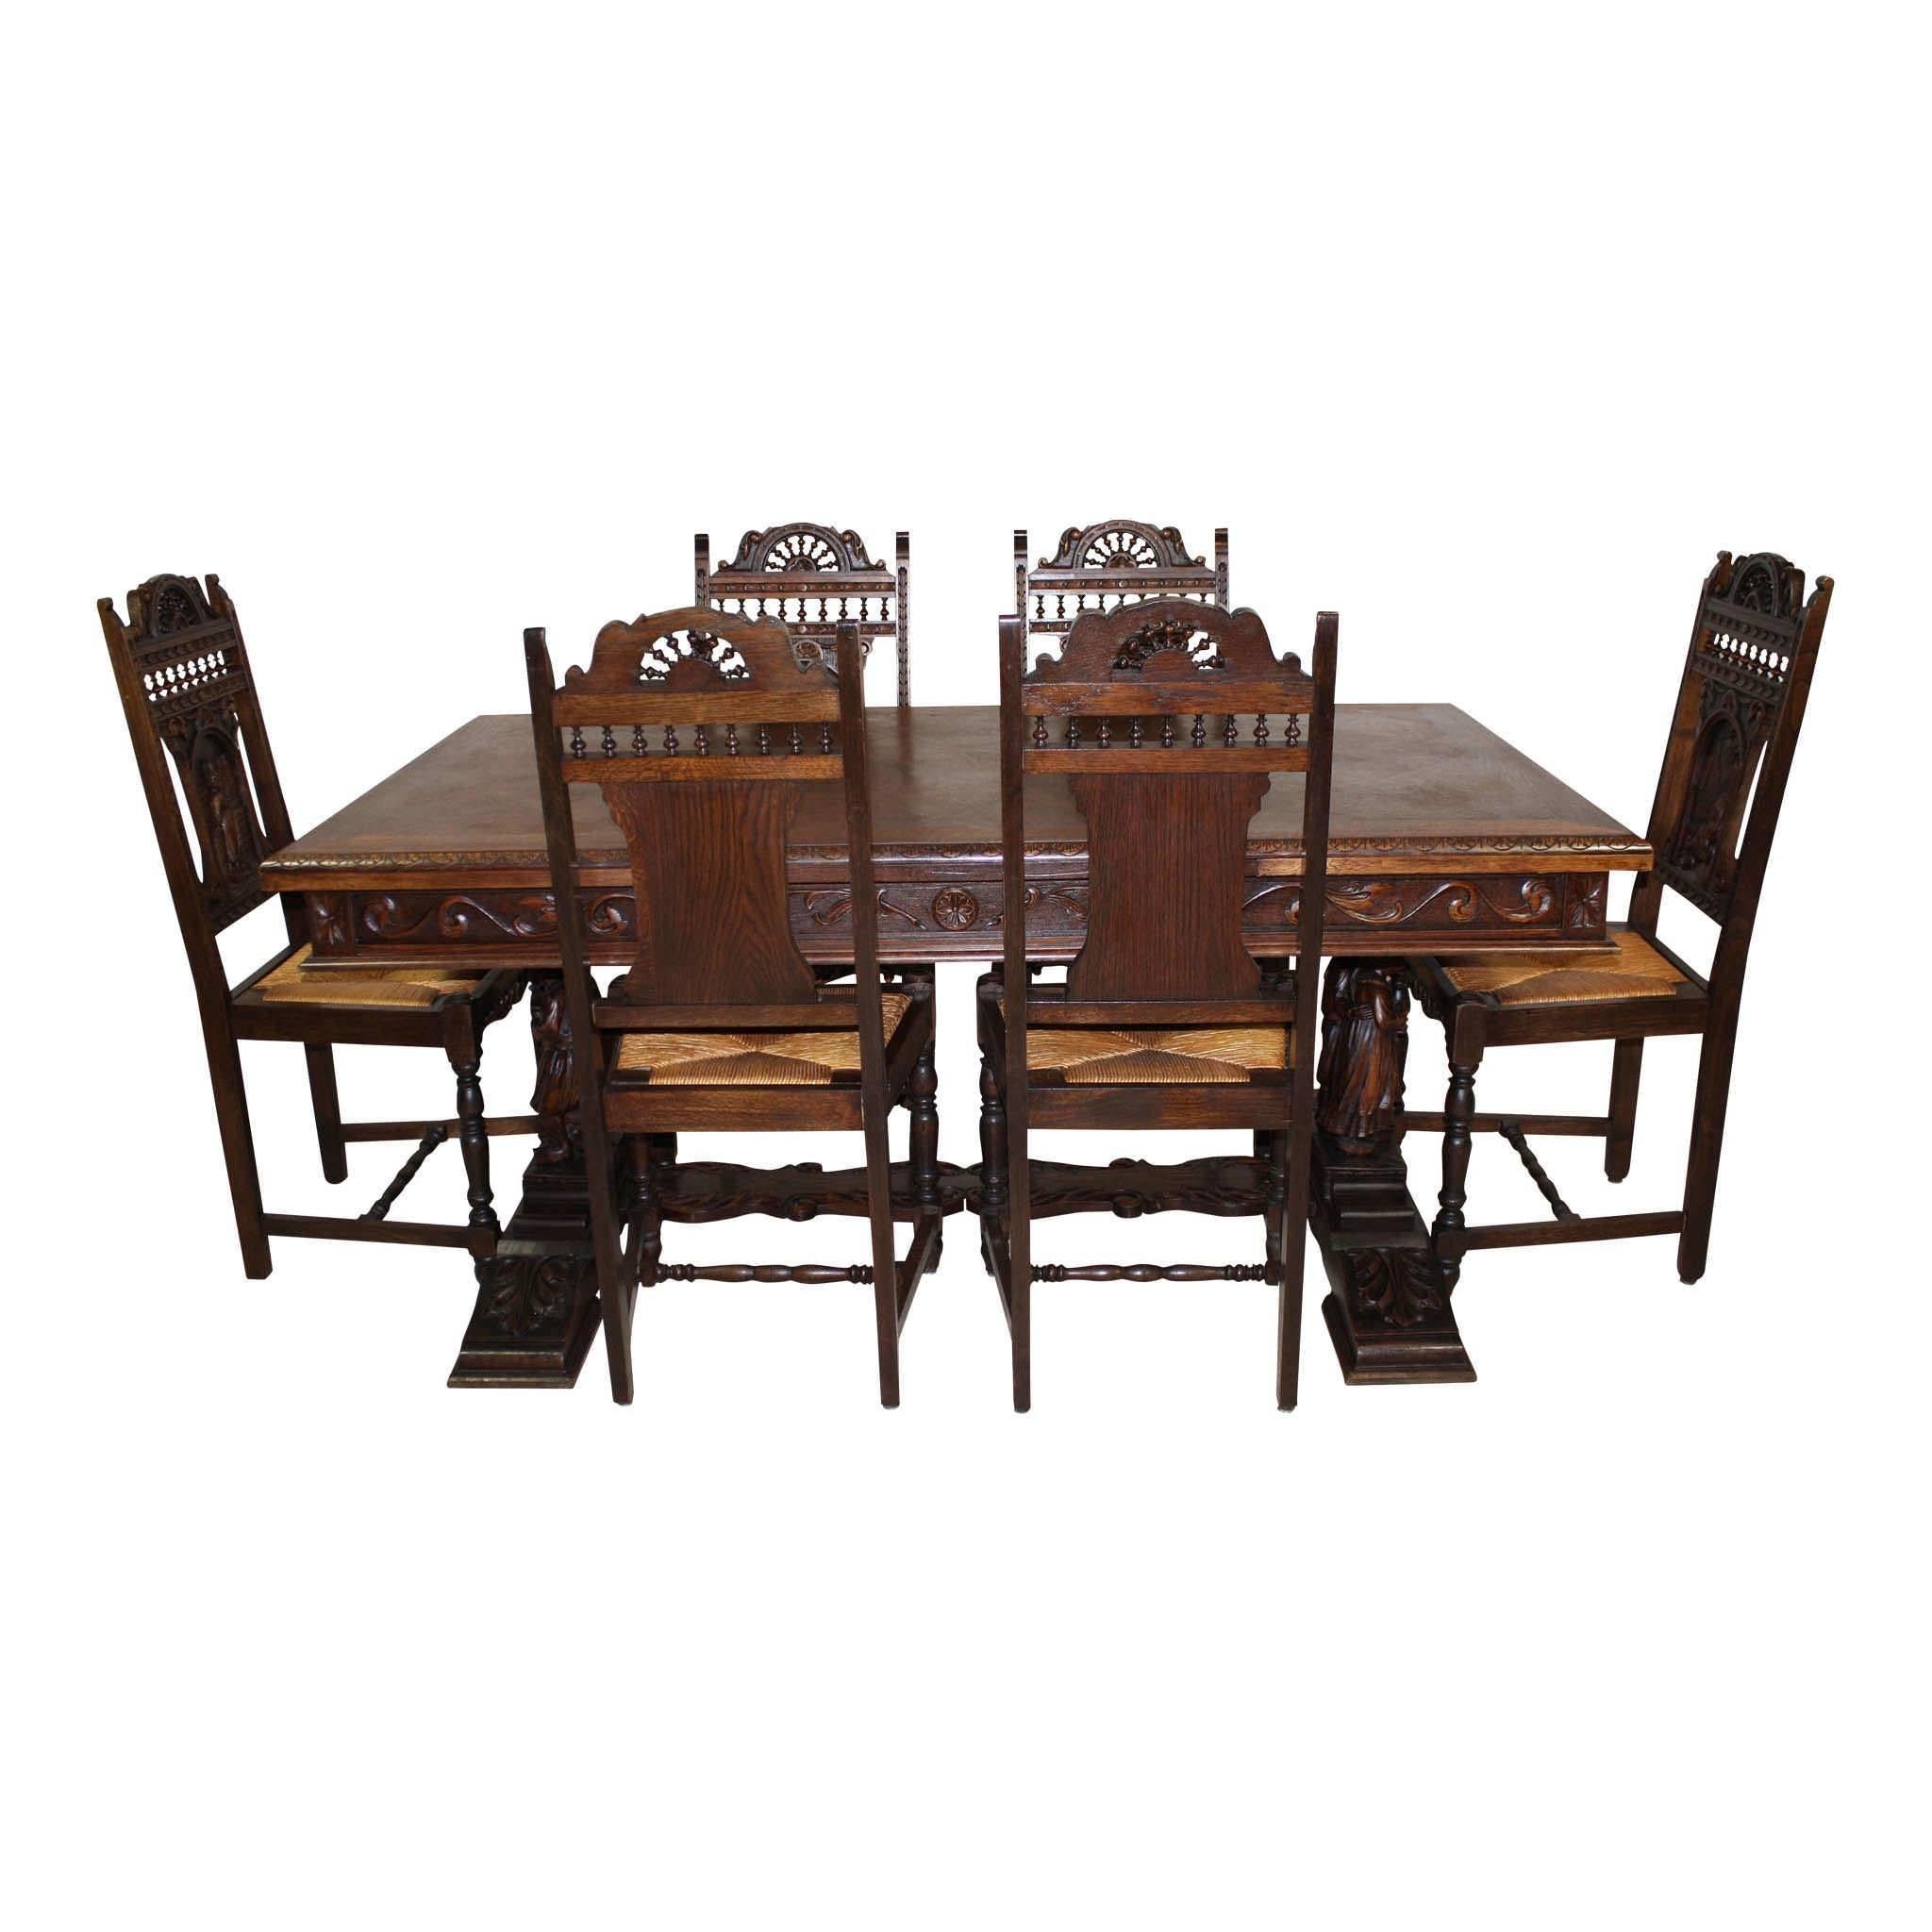 Belgian Draw Leaf Table with Six Chairs, circa 1910